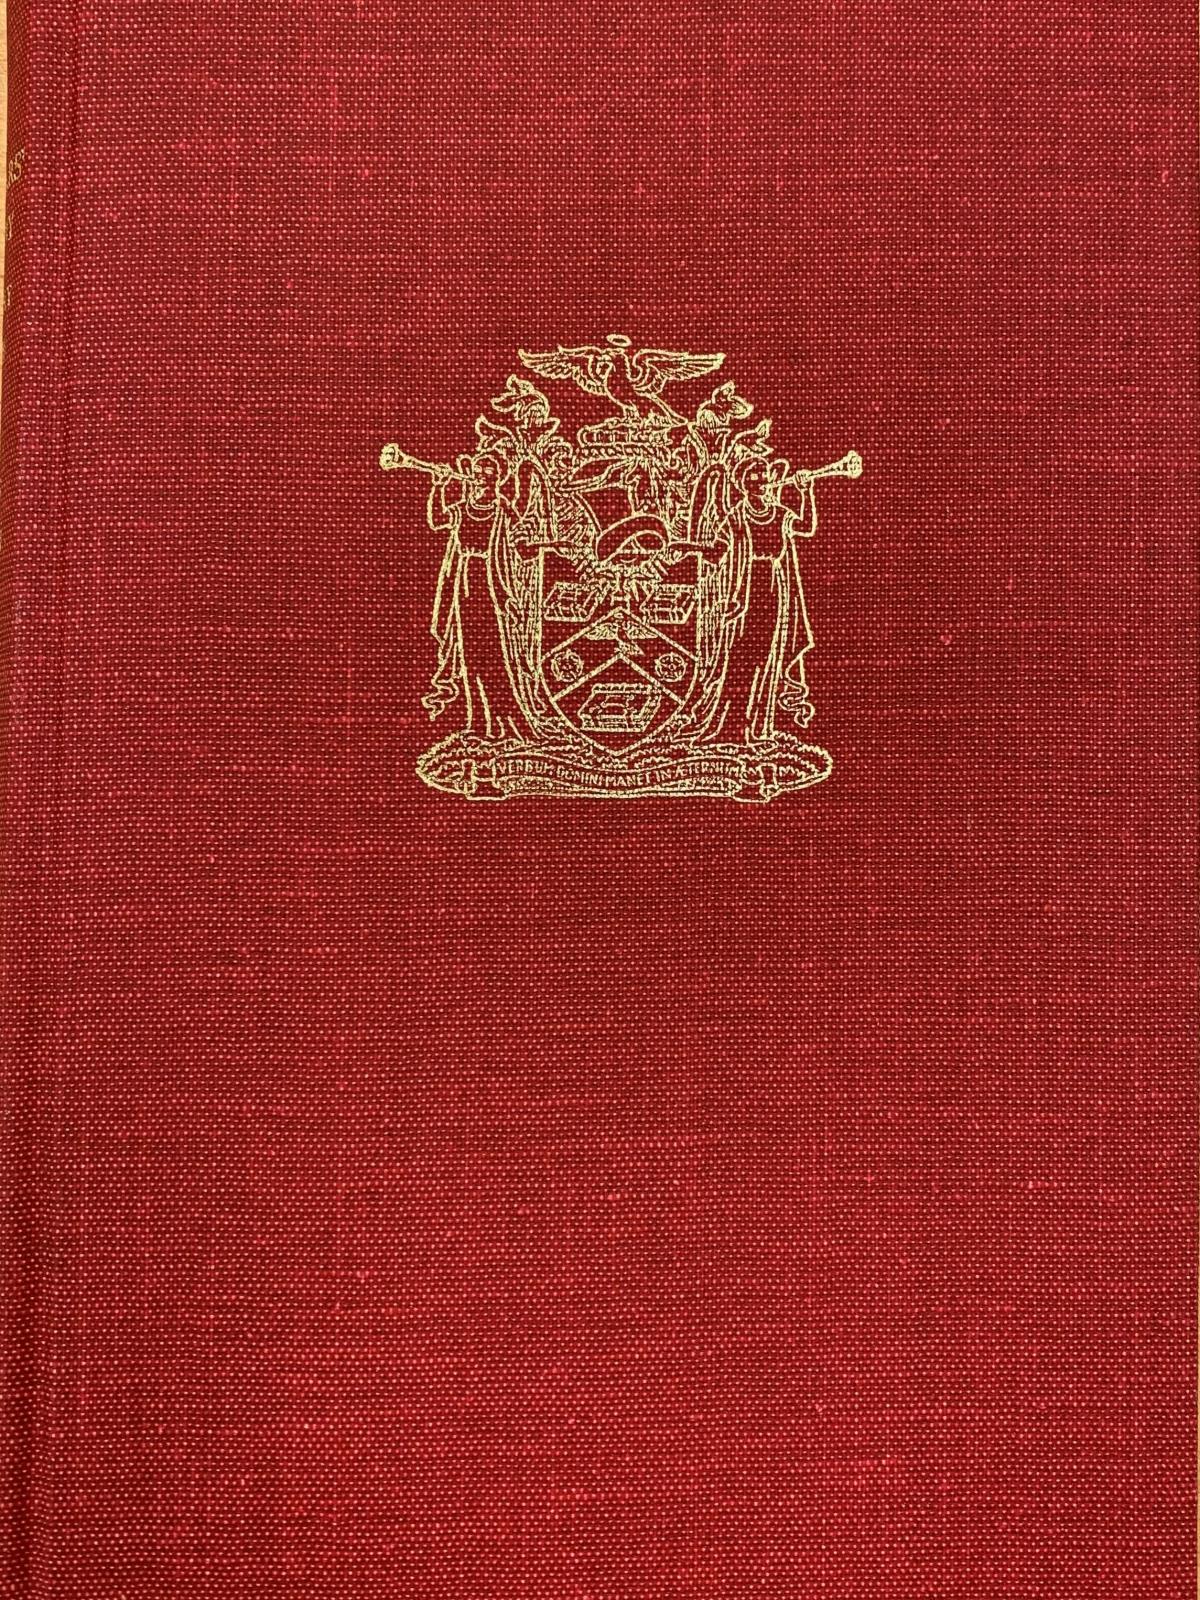 The Stationers’ Company History 1403-1959 by C Blagden